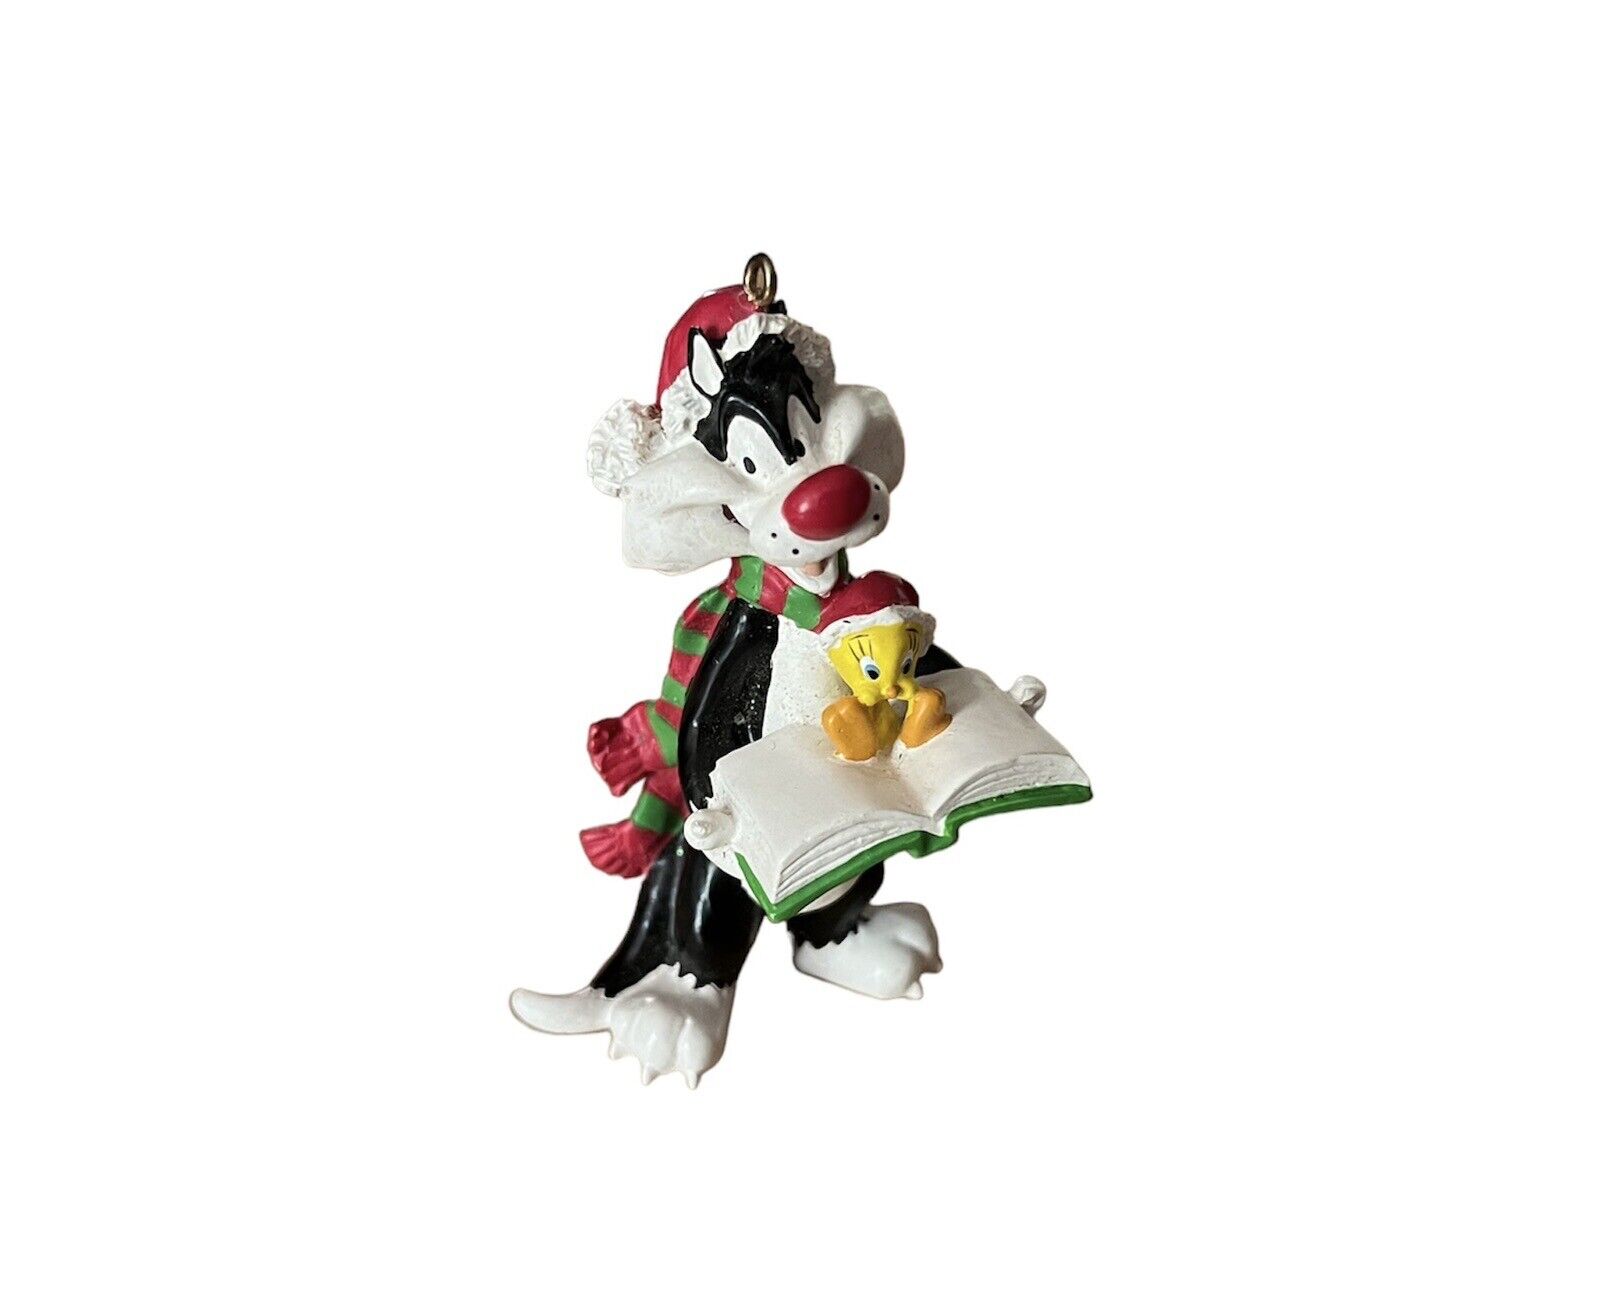 Sylvester and Tweety Christmas Ornament Vtg 1998 Warner Brothers Looney Tunes